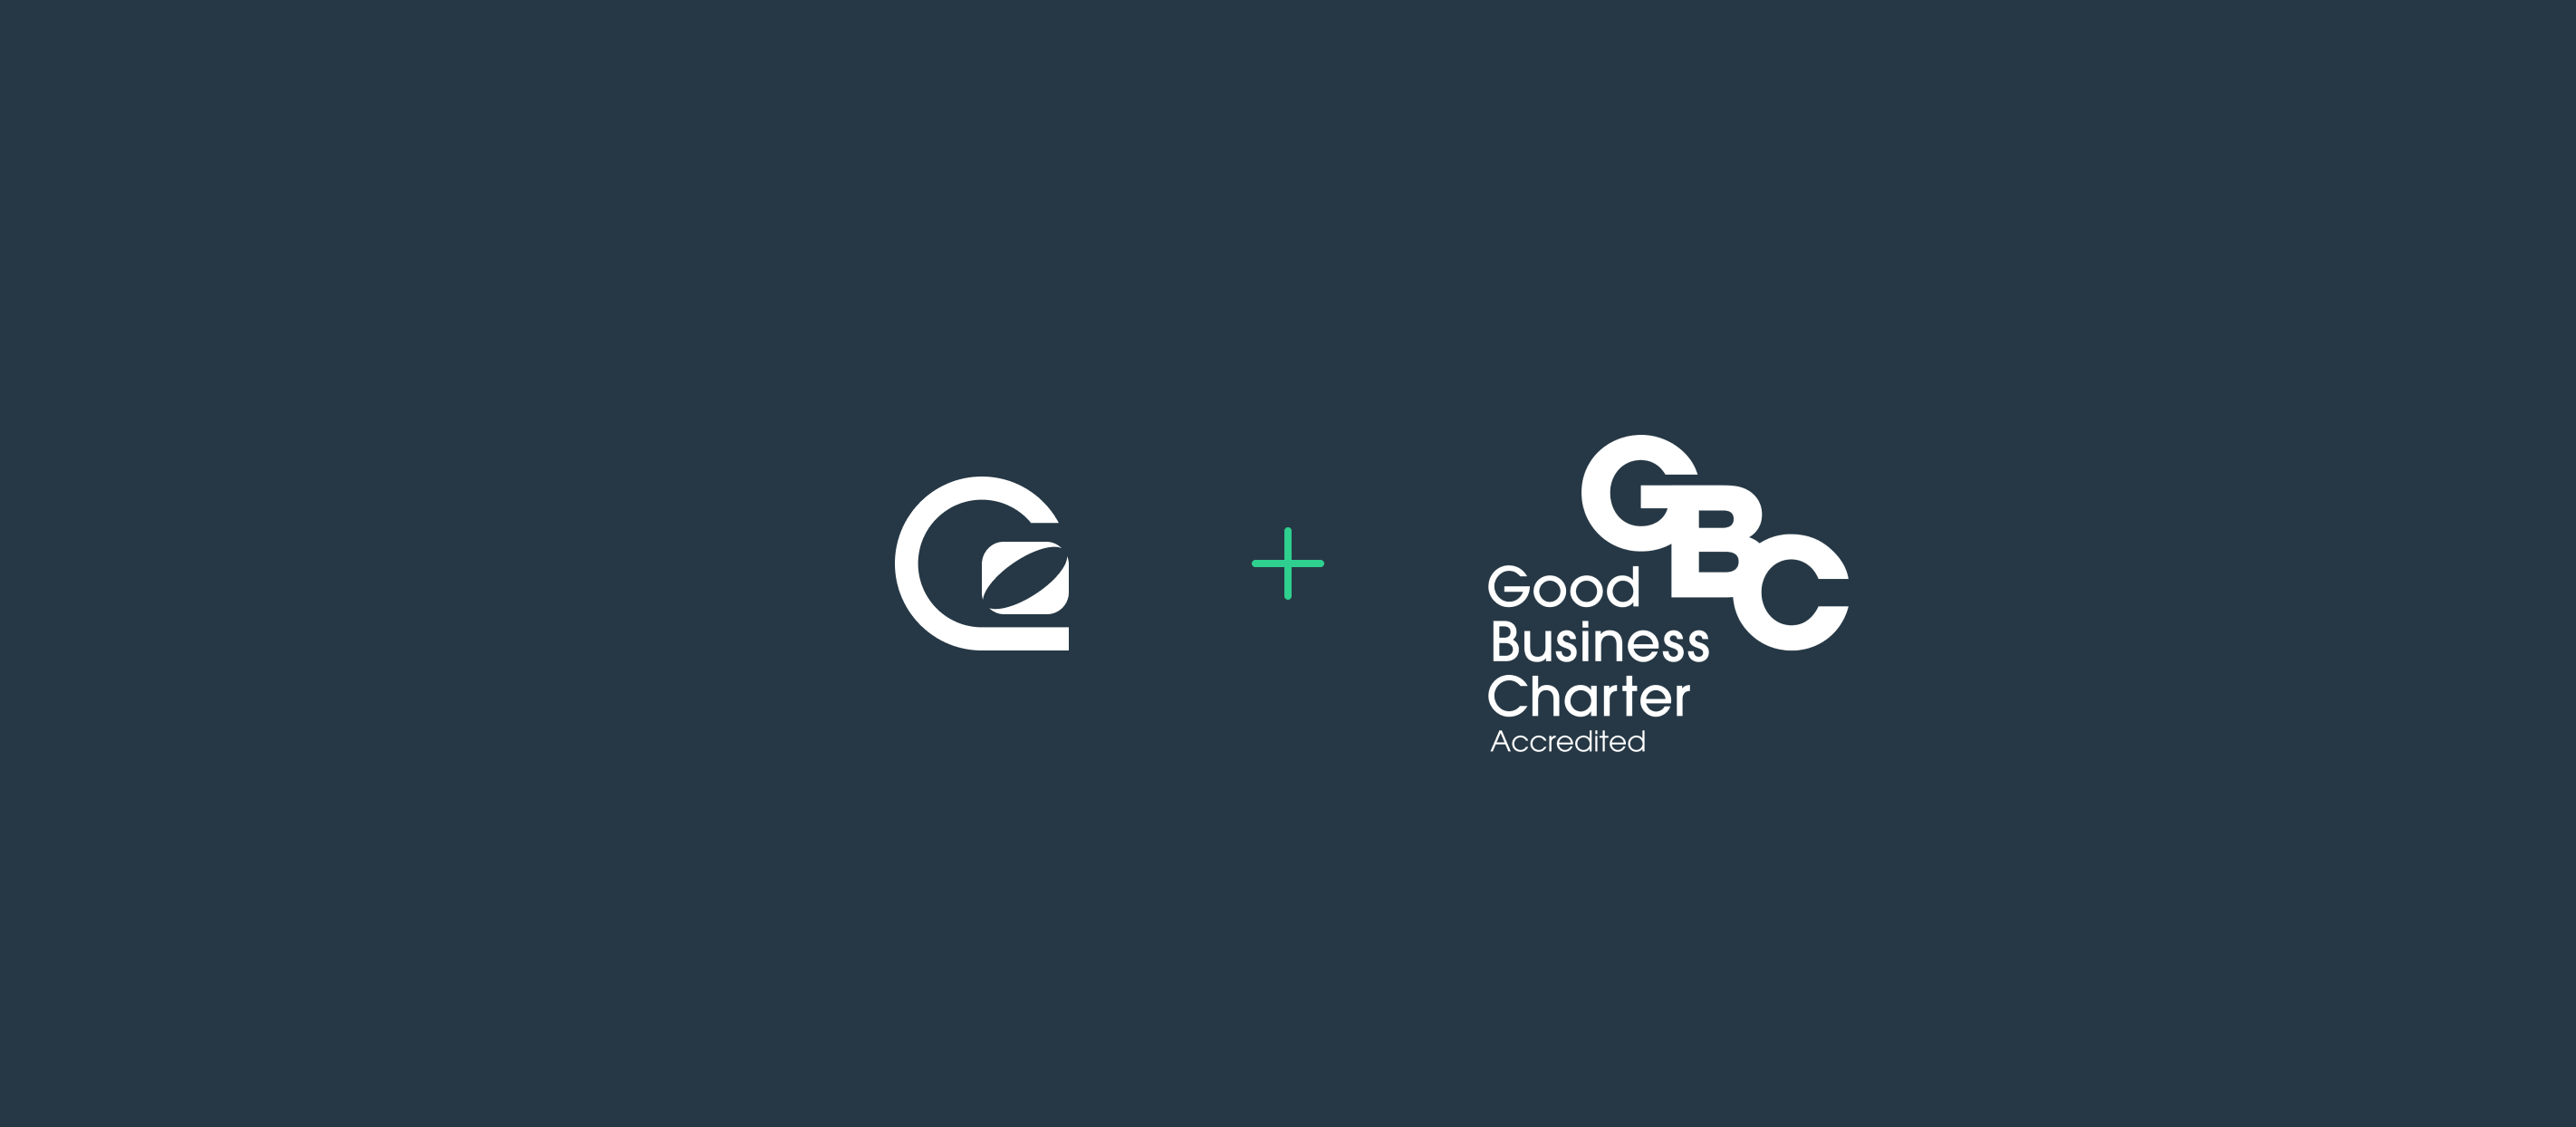 Good Business Charter GoSquared